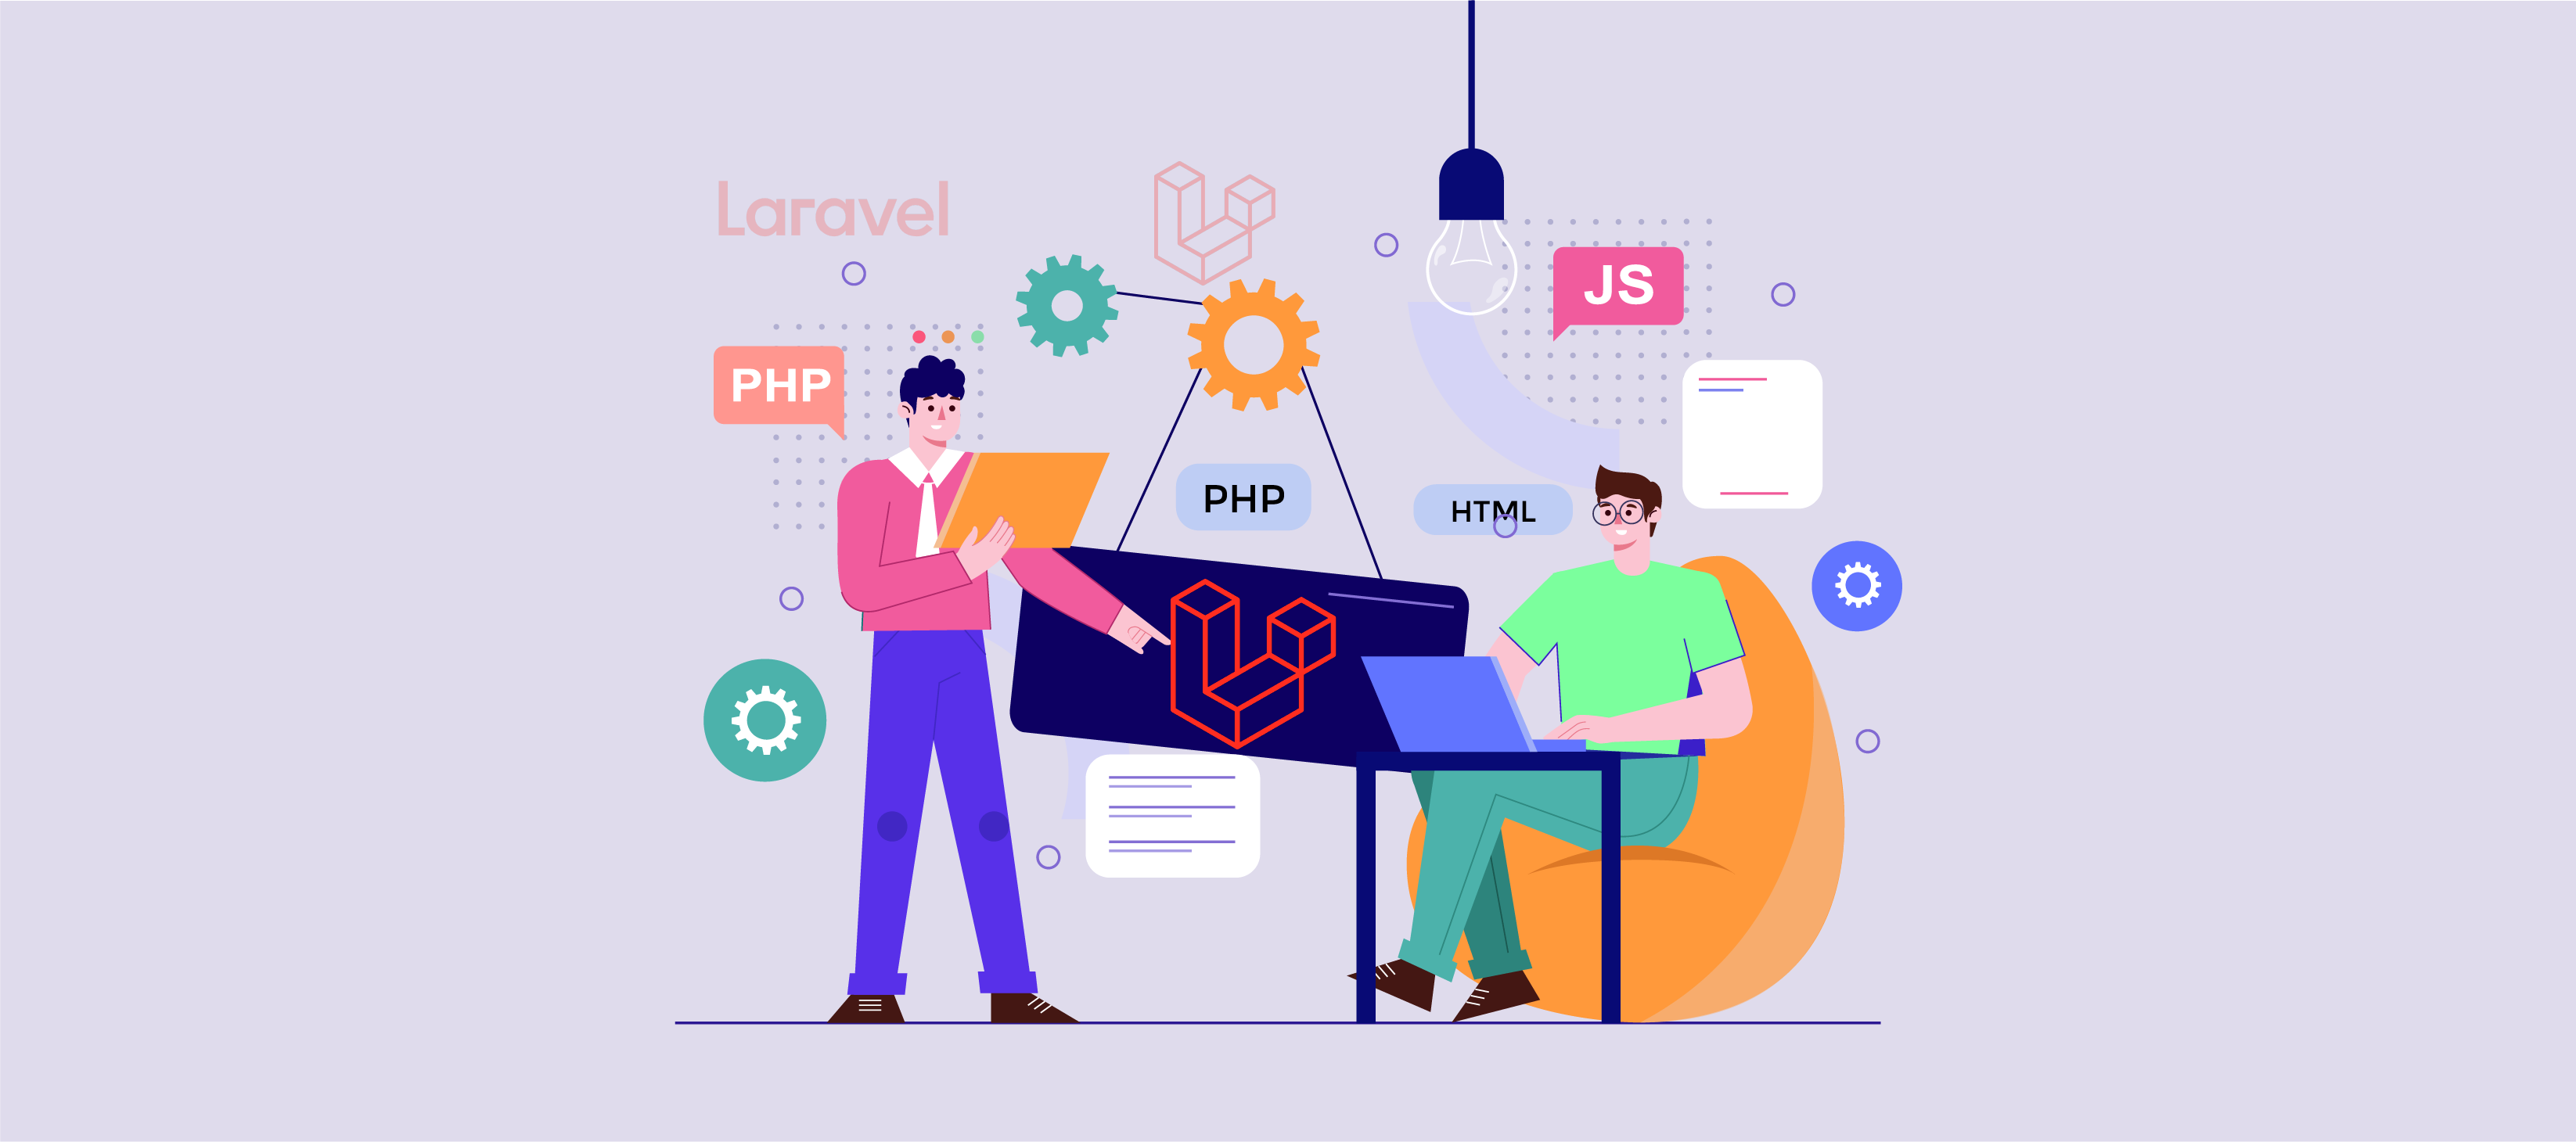 How can you find ideal Laravel development companies